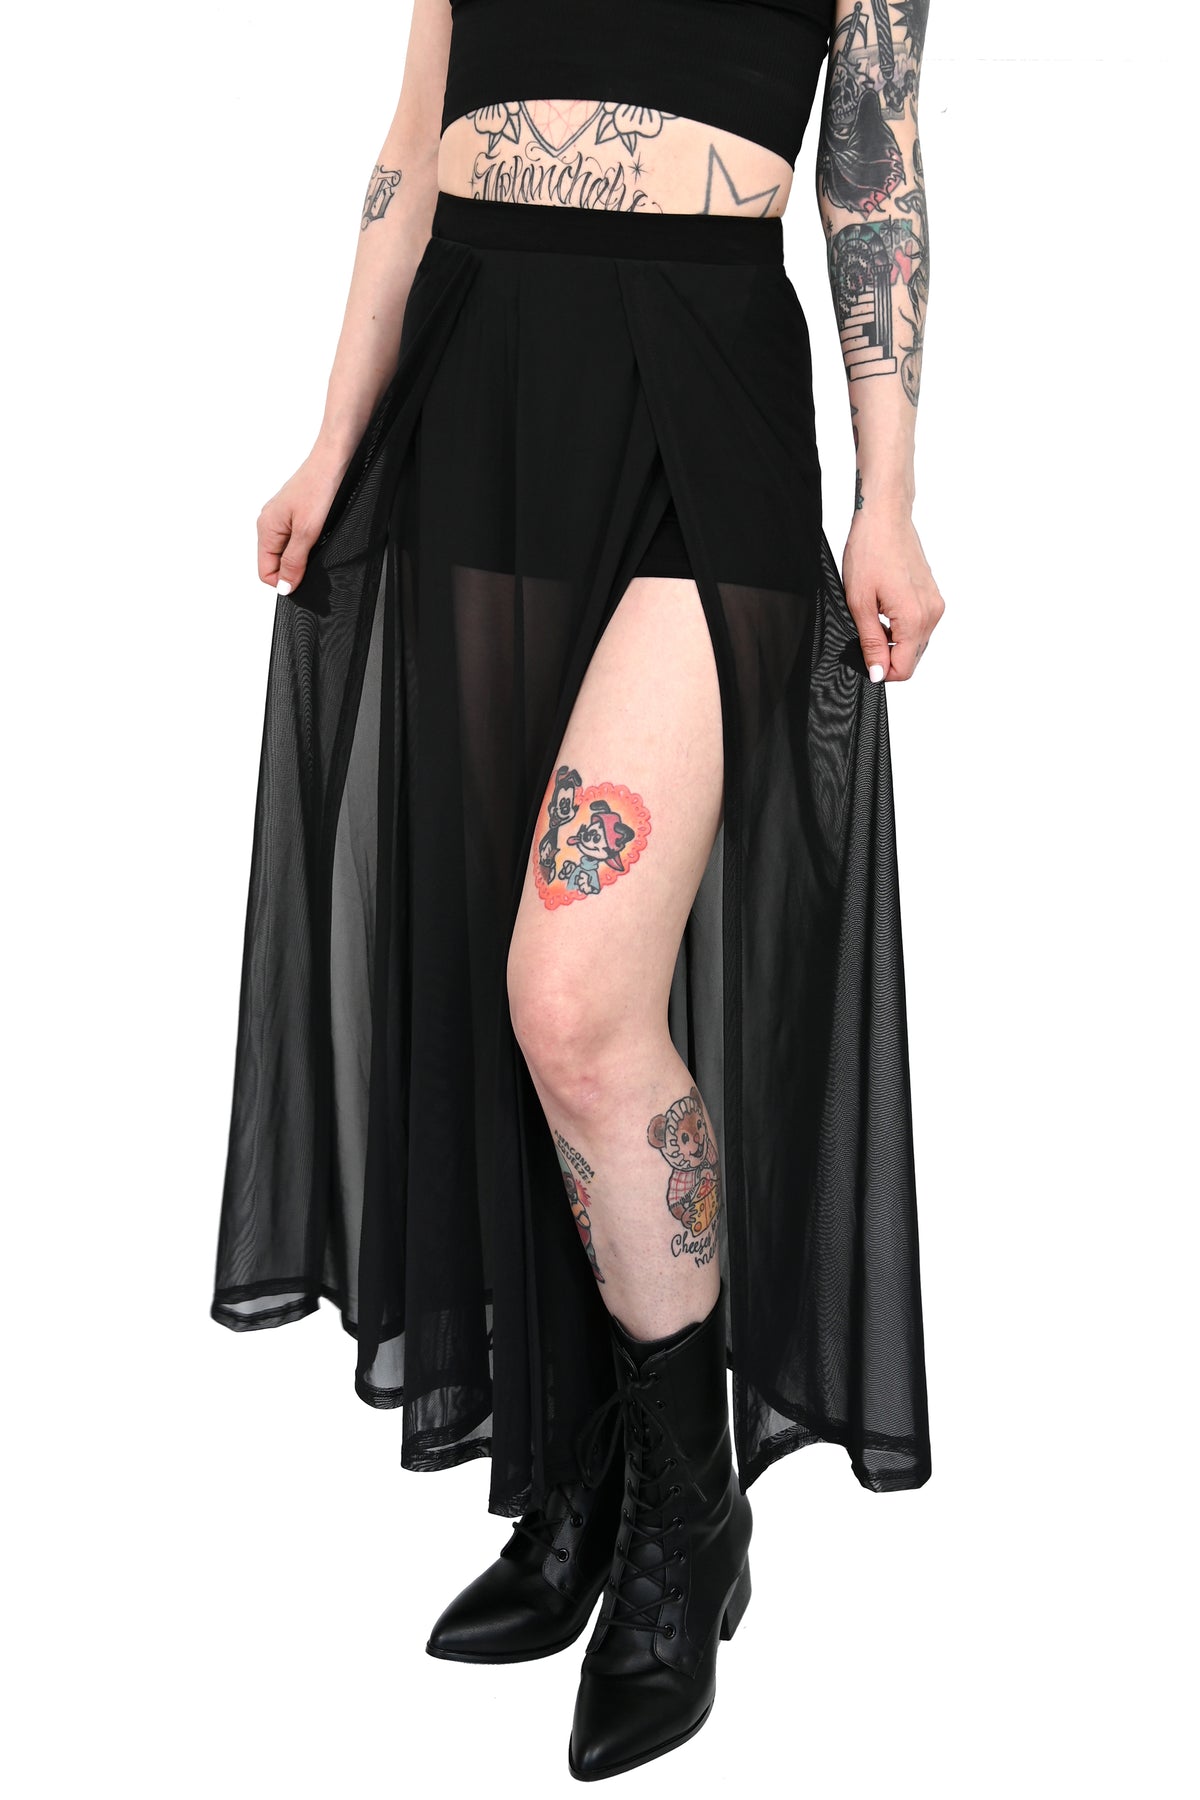 Mesh Darla Maxi Skirt With Built in Shorts - XS/S/3XL/4XL left!